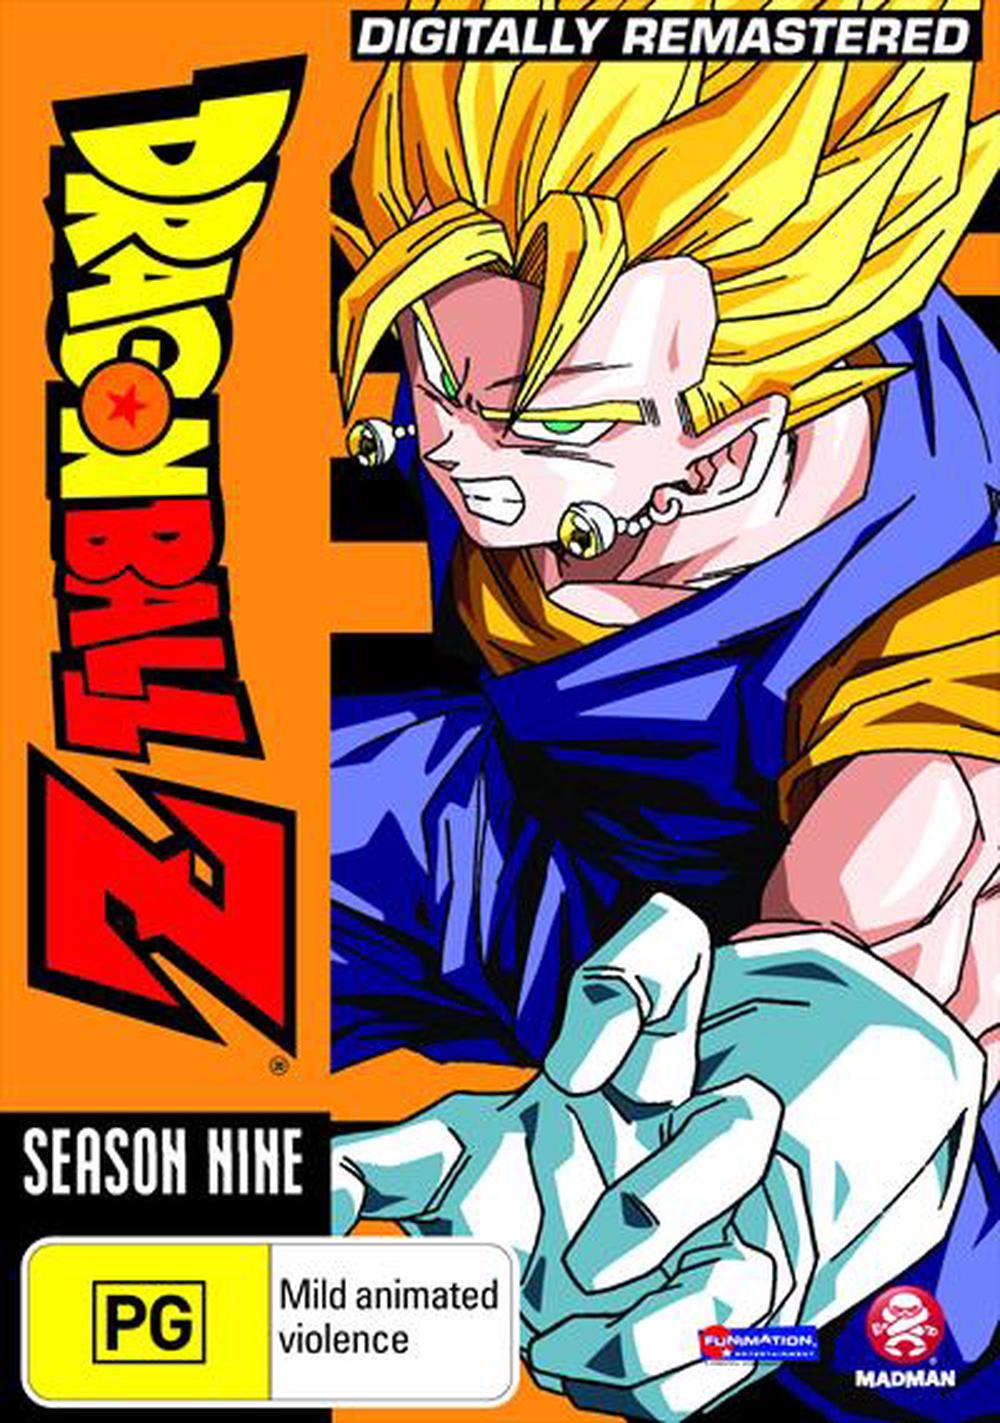 Dragon Ball Z Remastered Uncut Season 9 Dvd Buy Online At The Nile